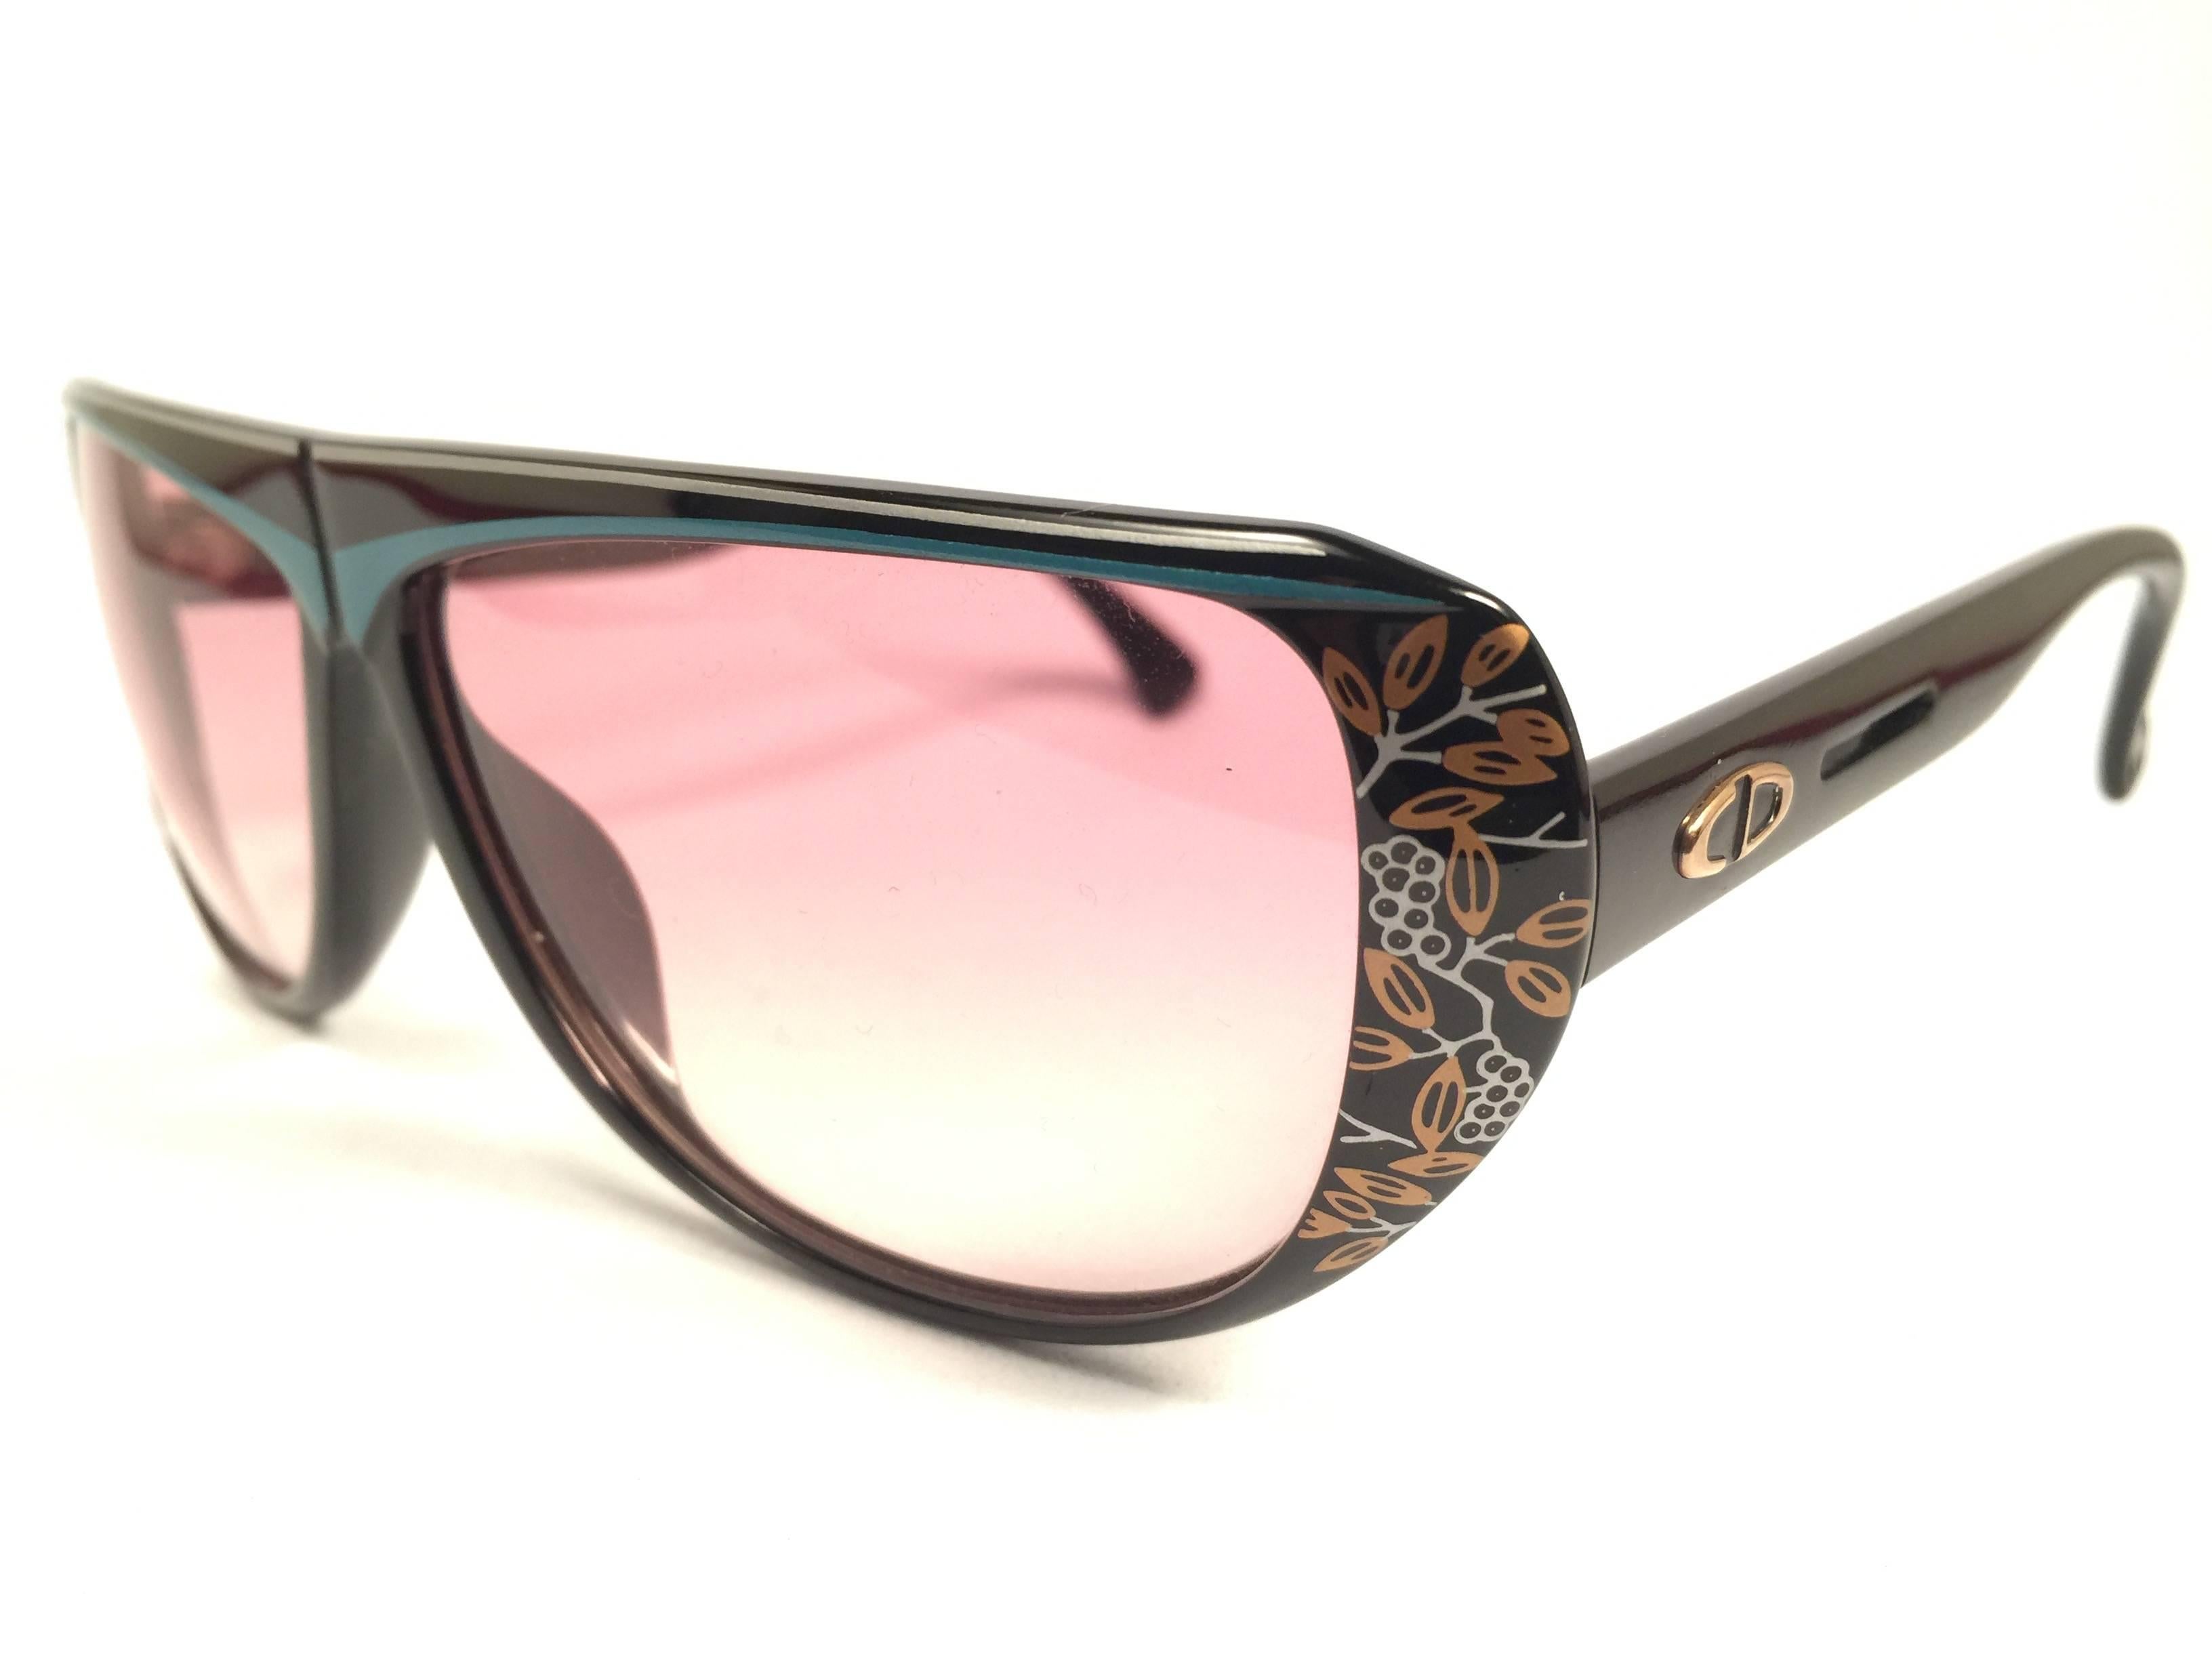 New Vintage Christian Dior Black 2421 Floral Optyl 1980's Sunglasses Germany 1